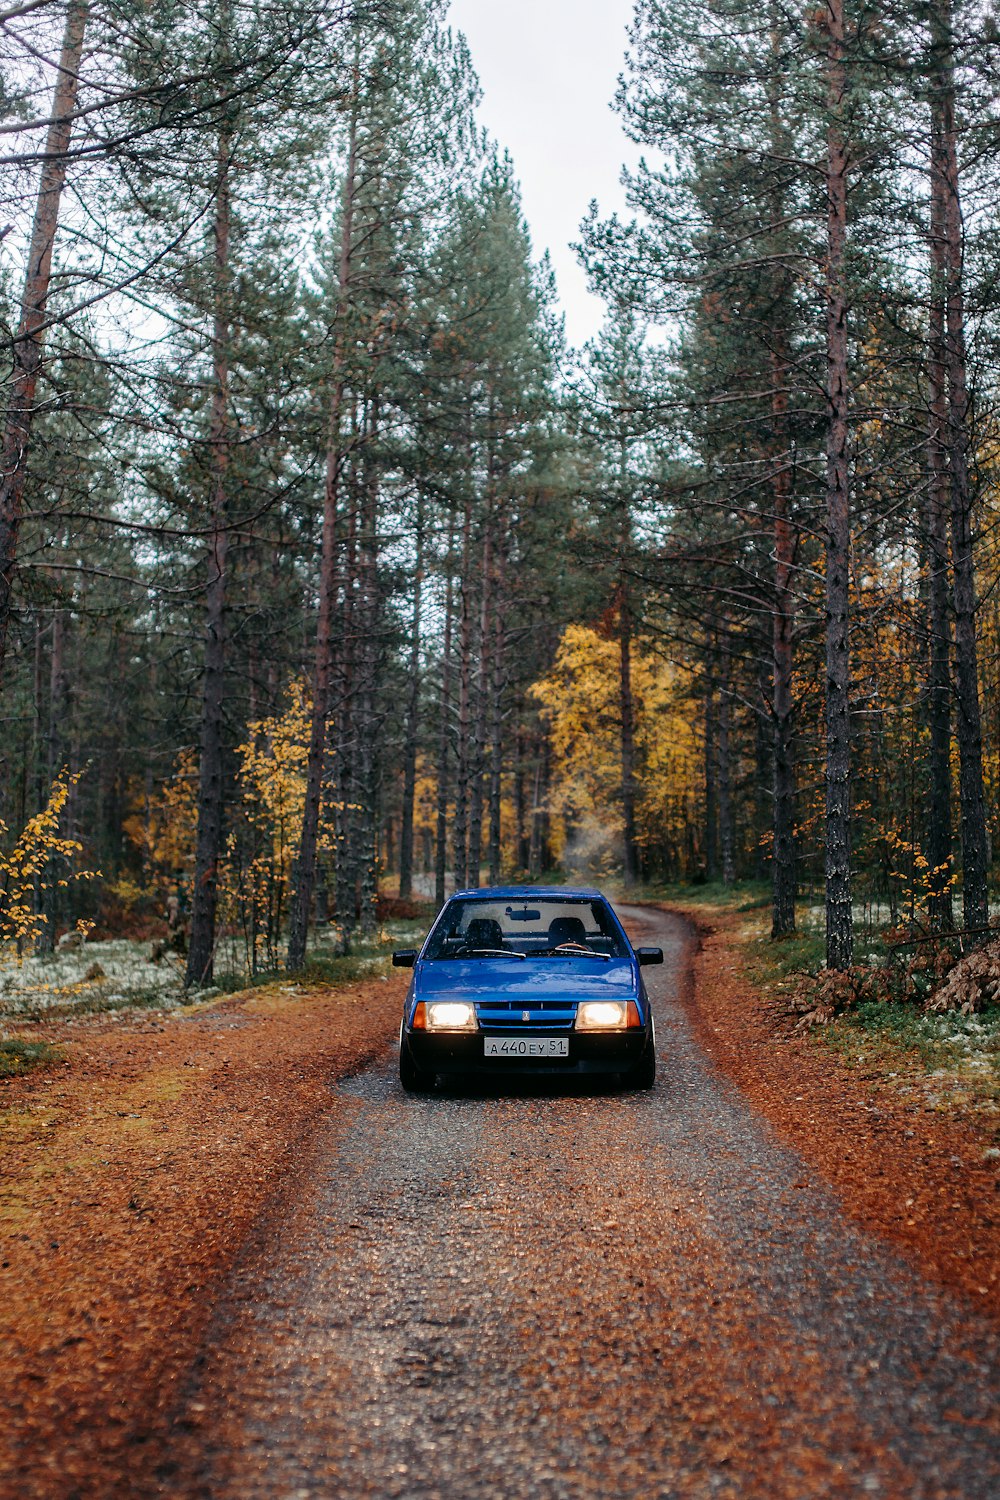 black car on dirt road in between trees during daytime